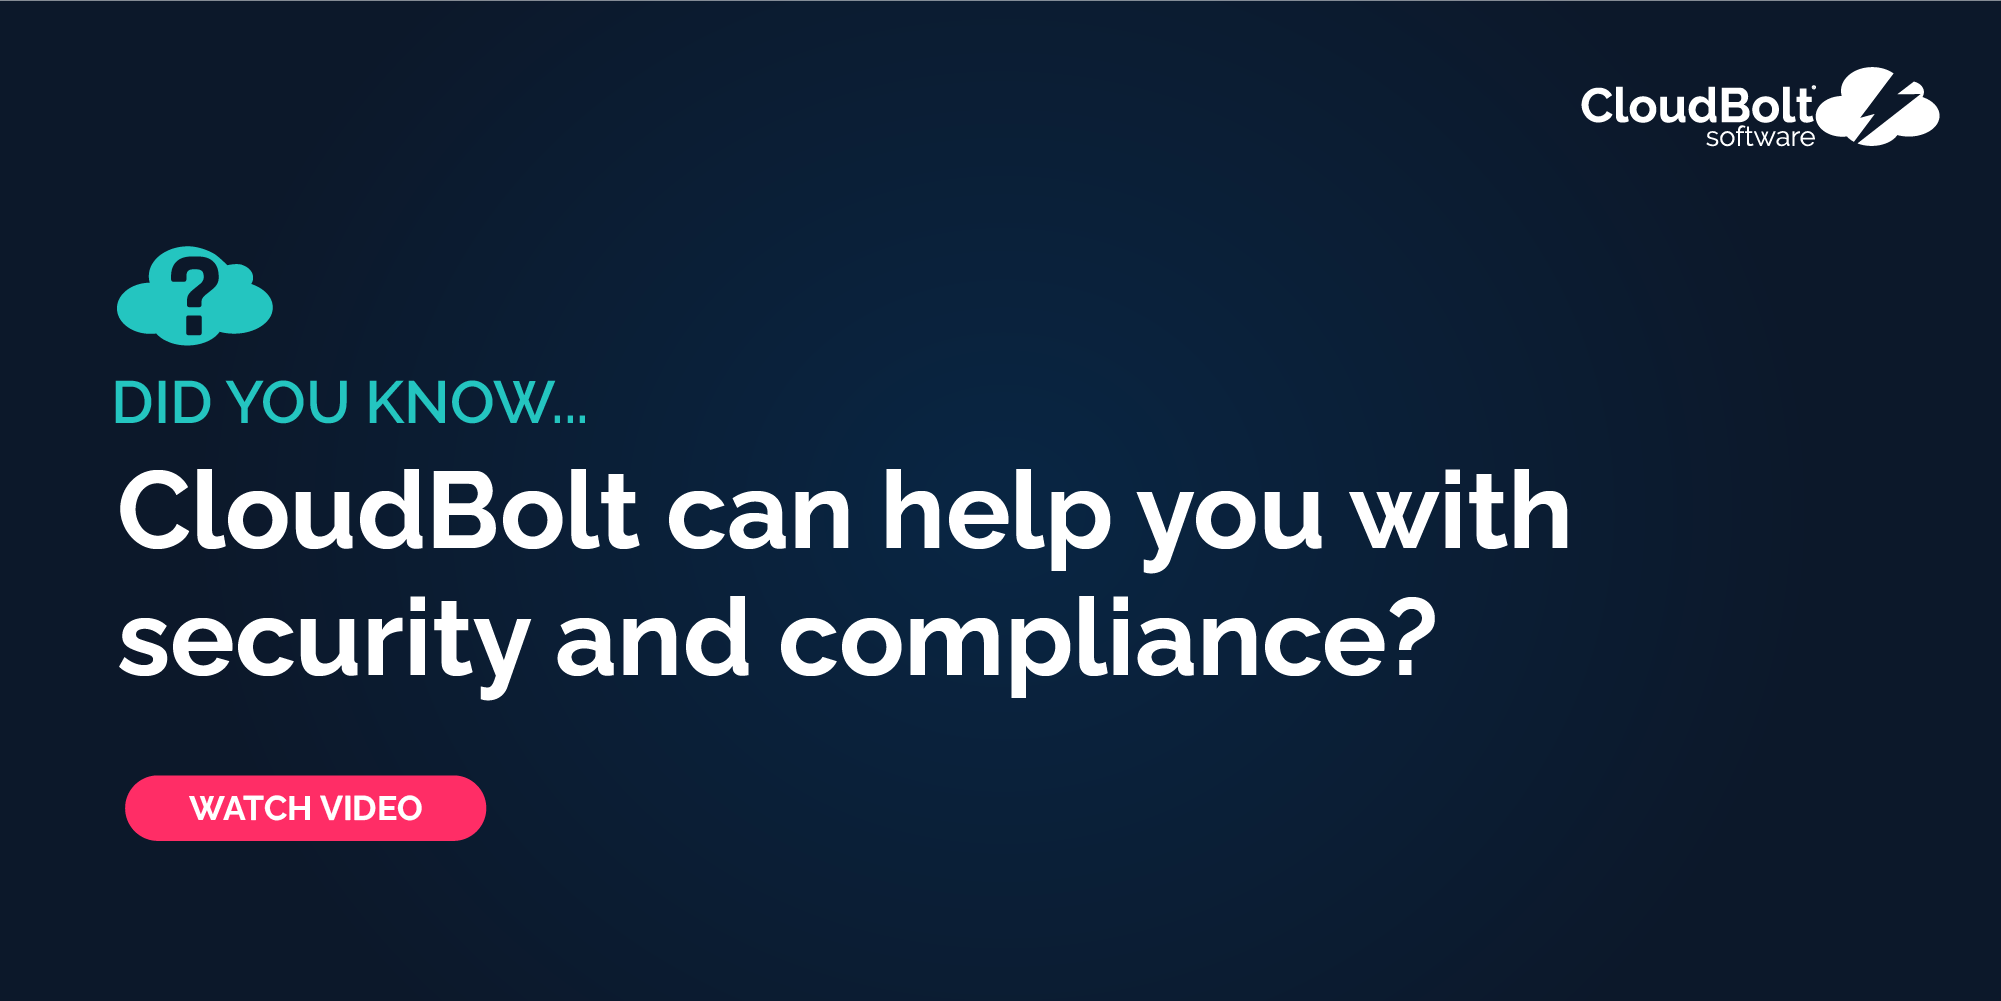 Did you know... CloudBolt can help you with security and compliance?